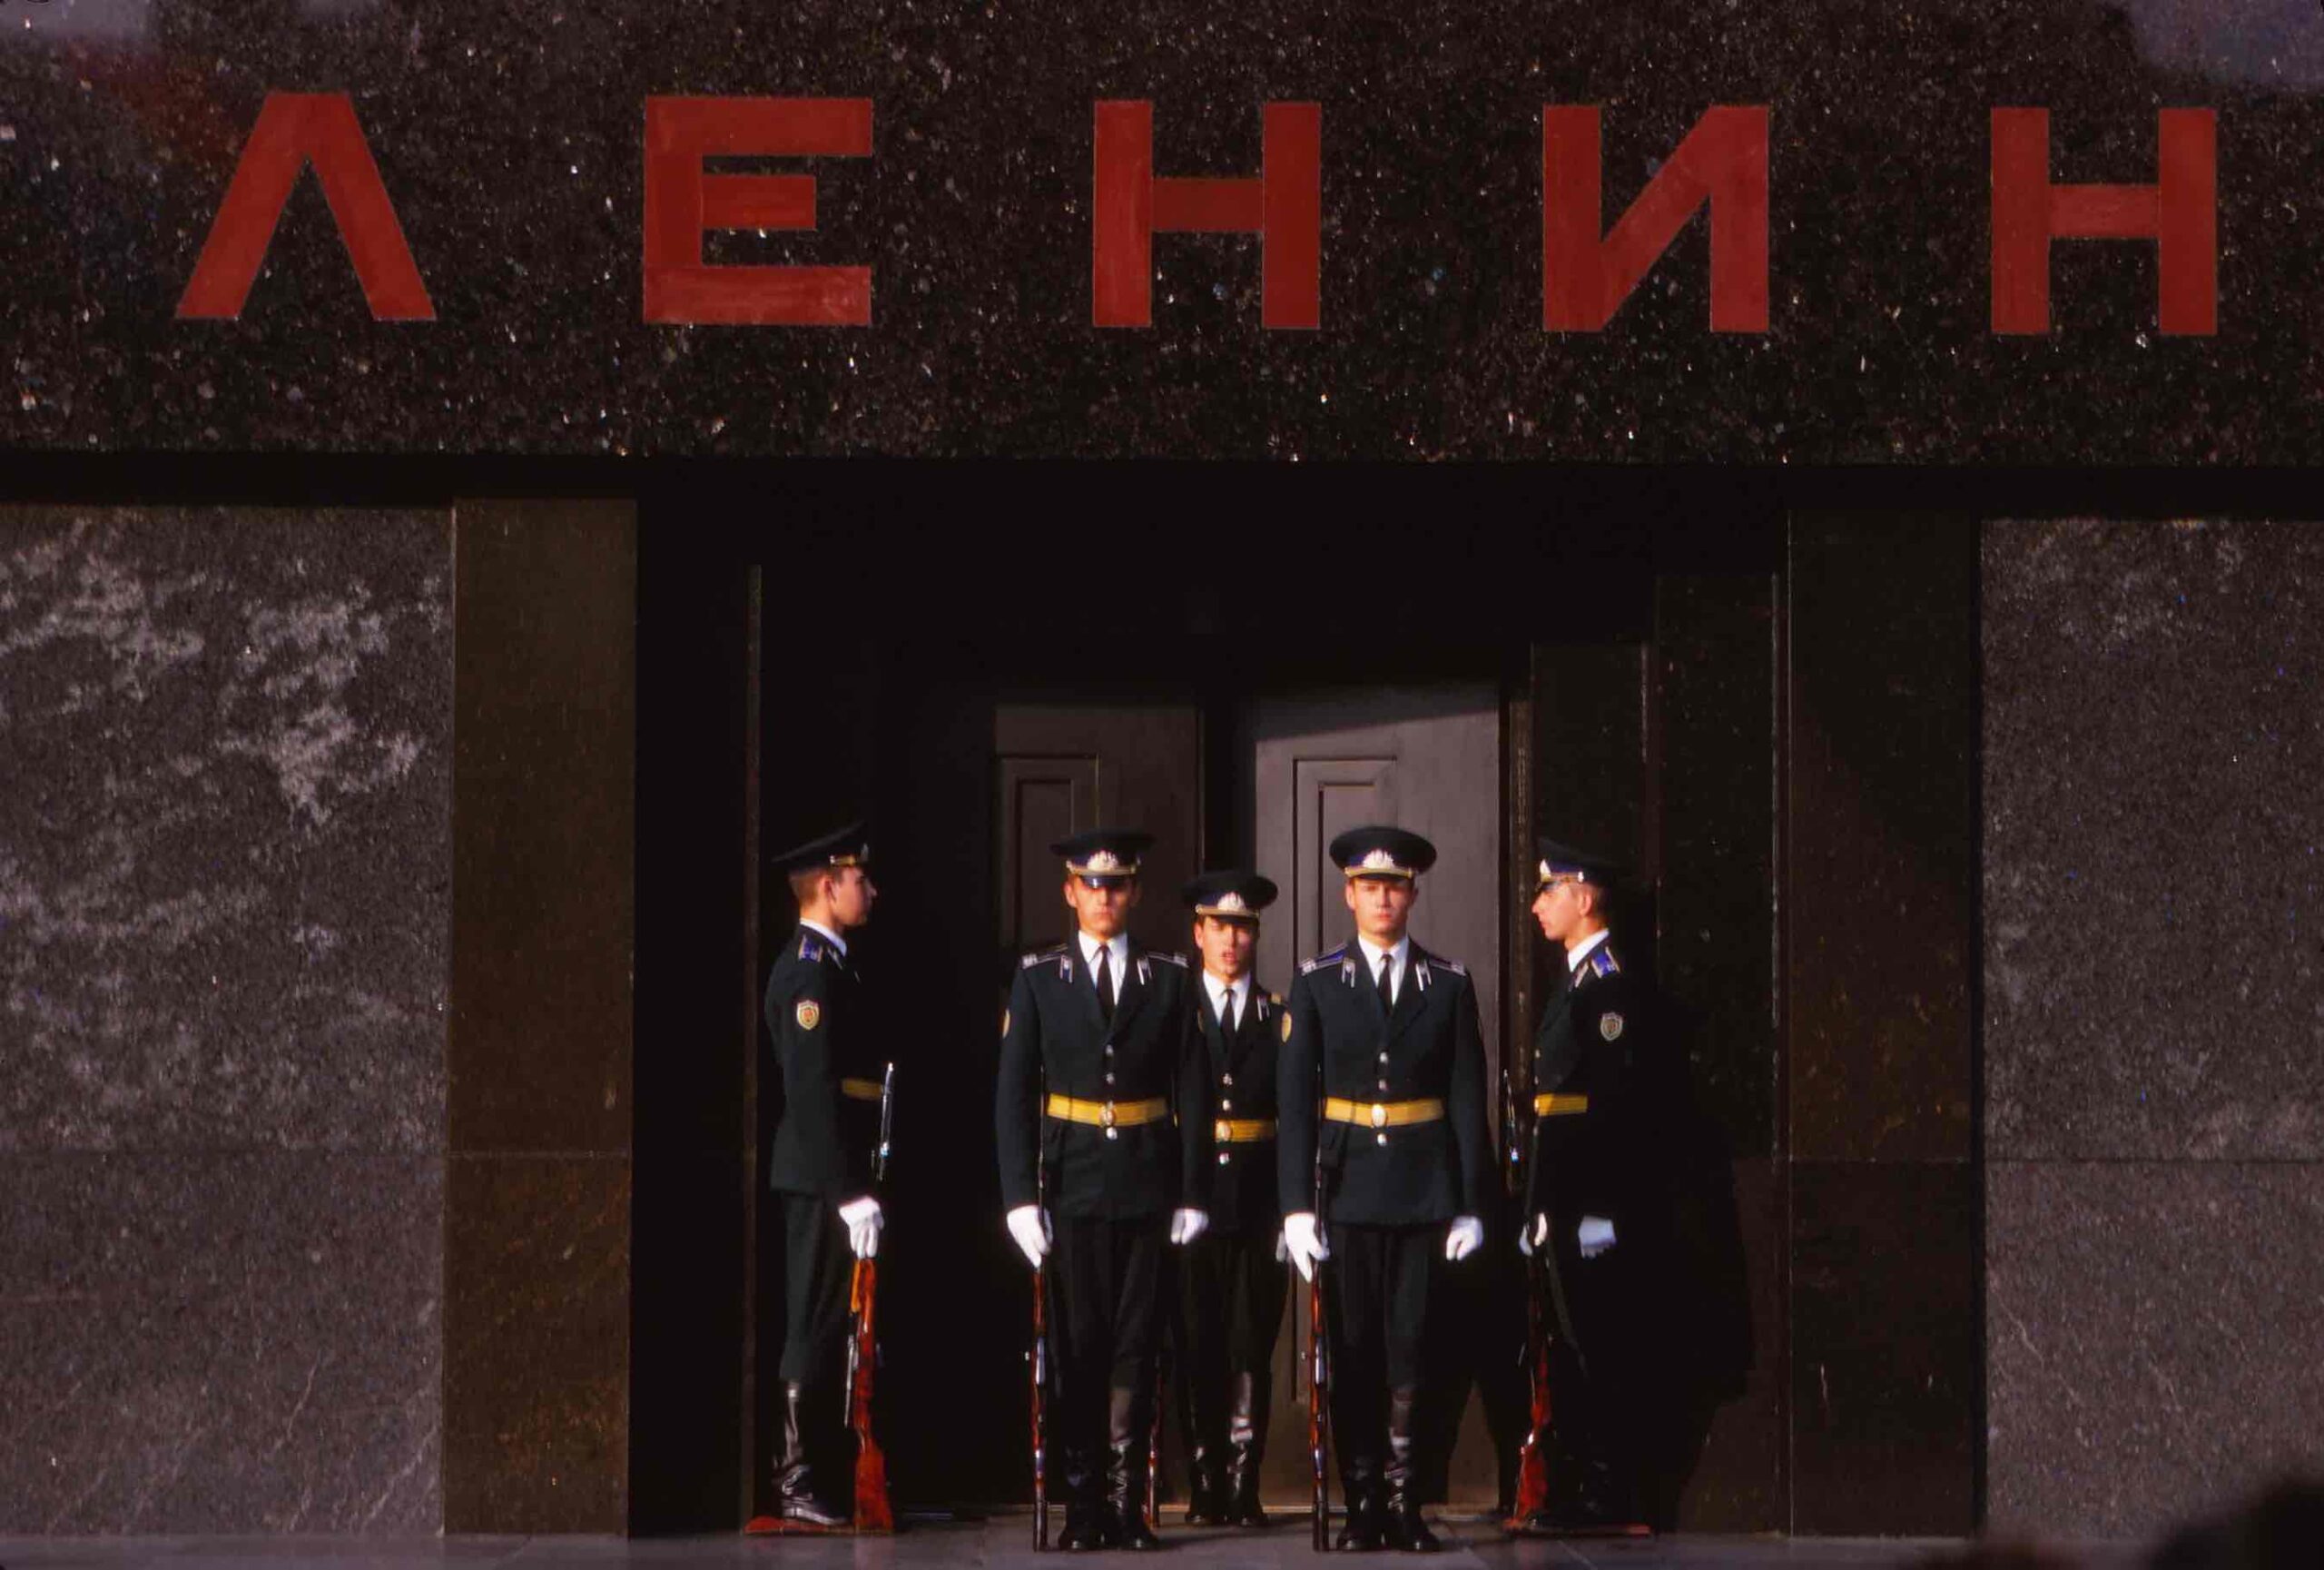 Changing Guard at Lenins Tomb, Red Square, Moscow, 20th century.